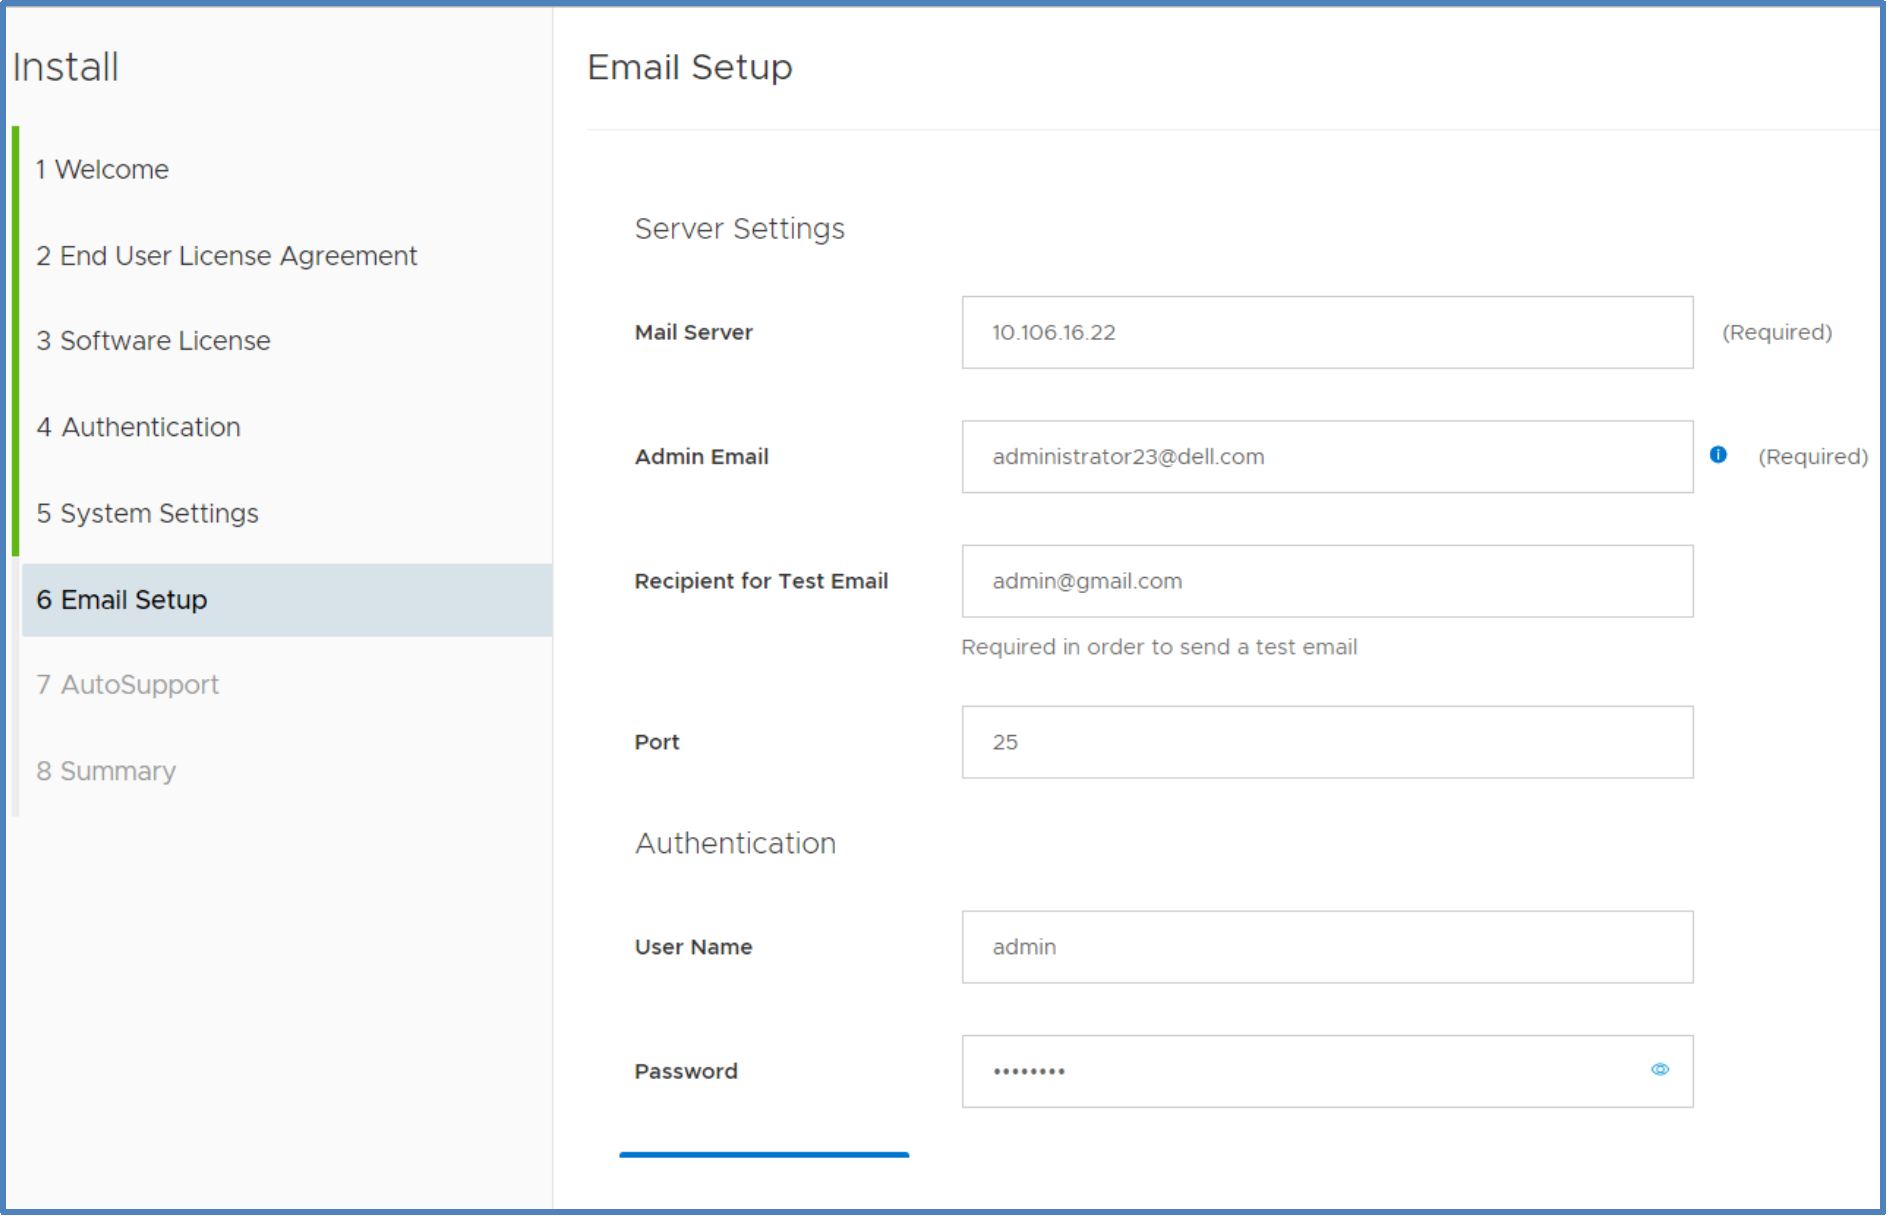 This figure shows the Email Setup screen